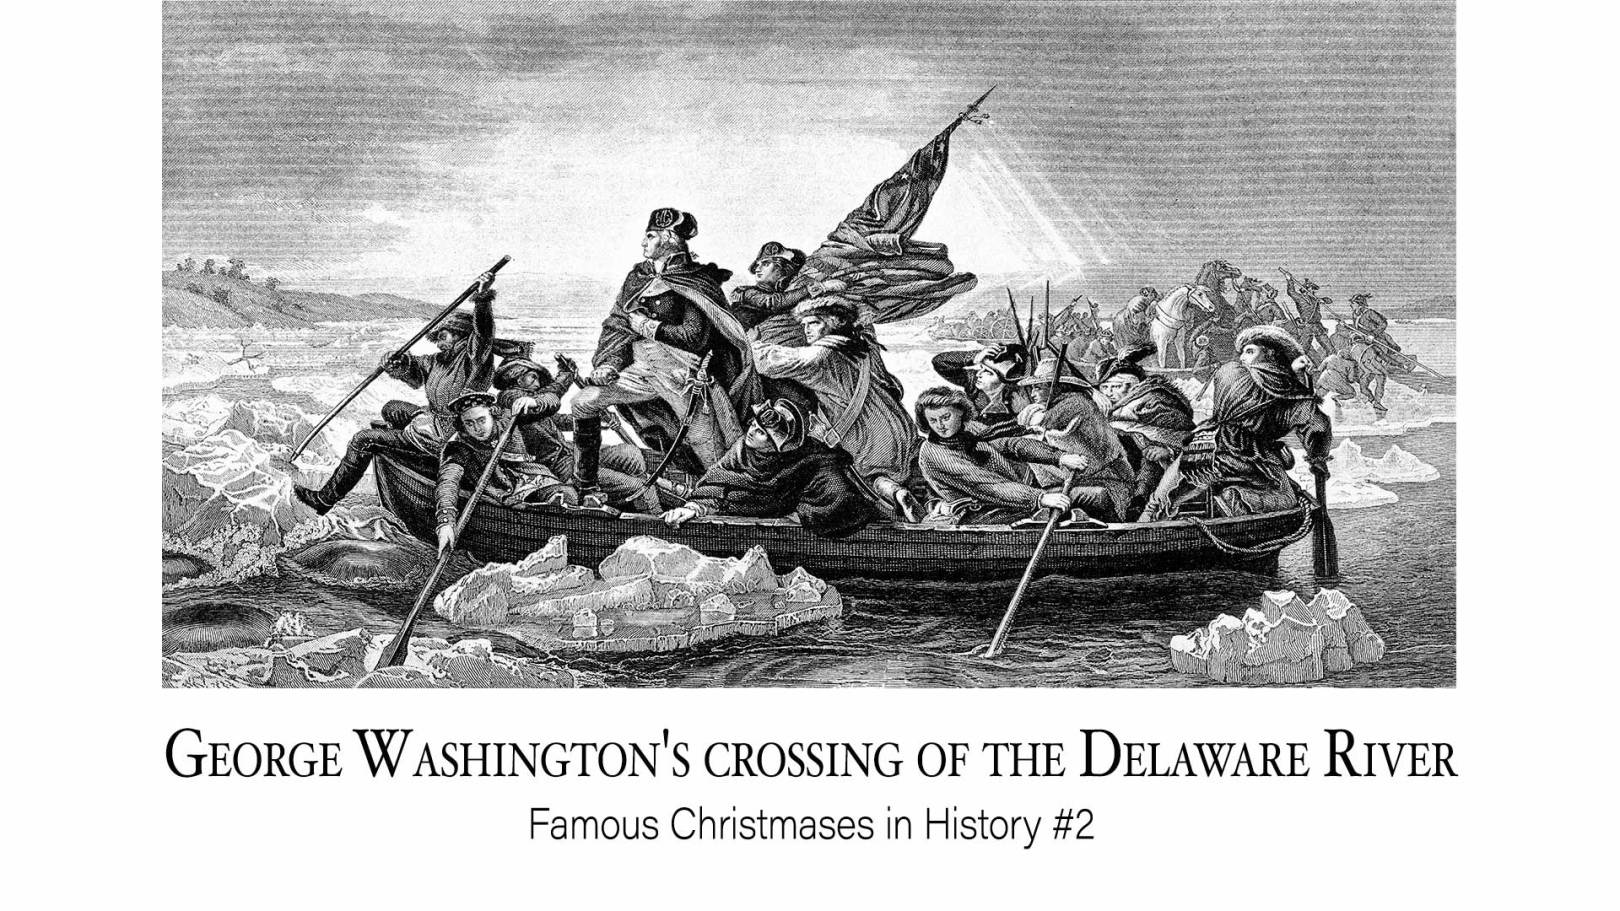 George Washington’s crossing of the Delaware River: Famous Christmases in History #2